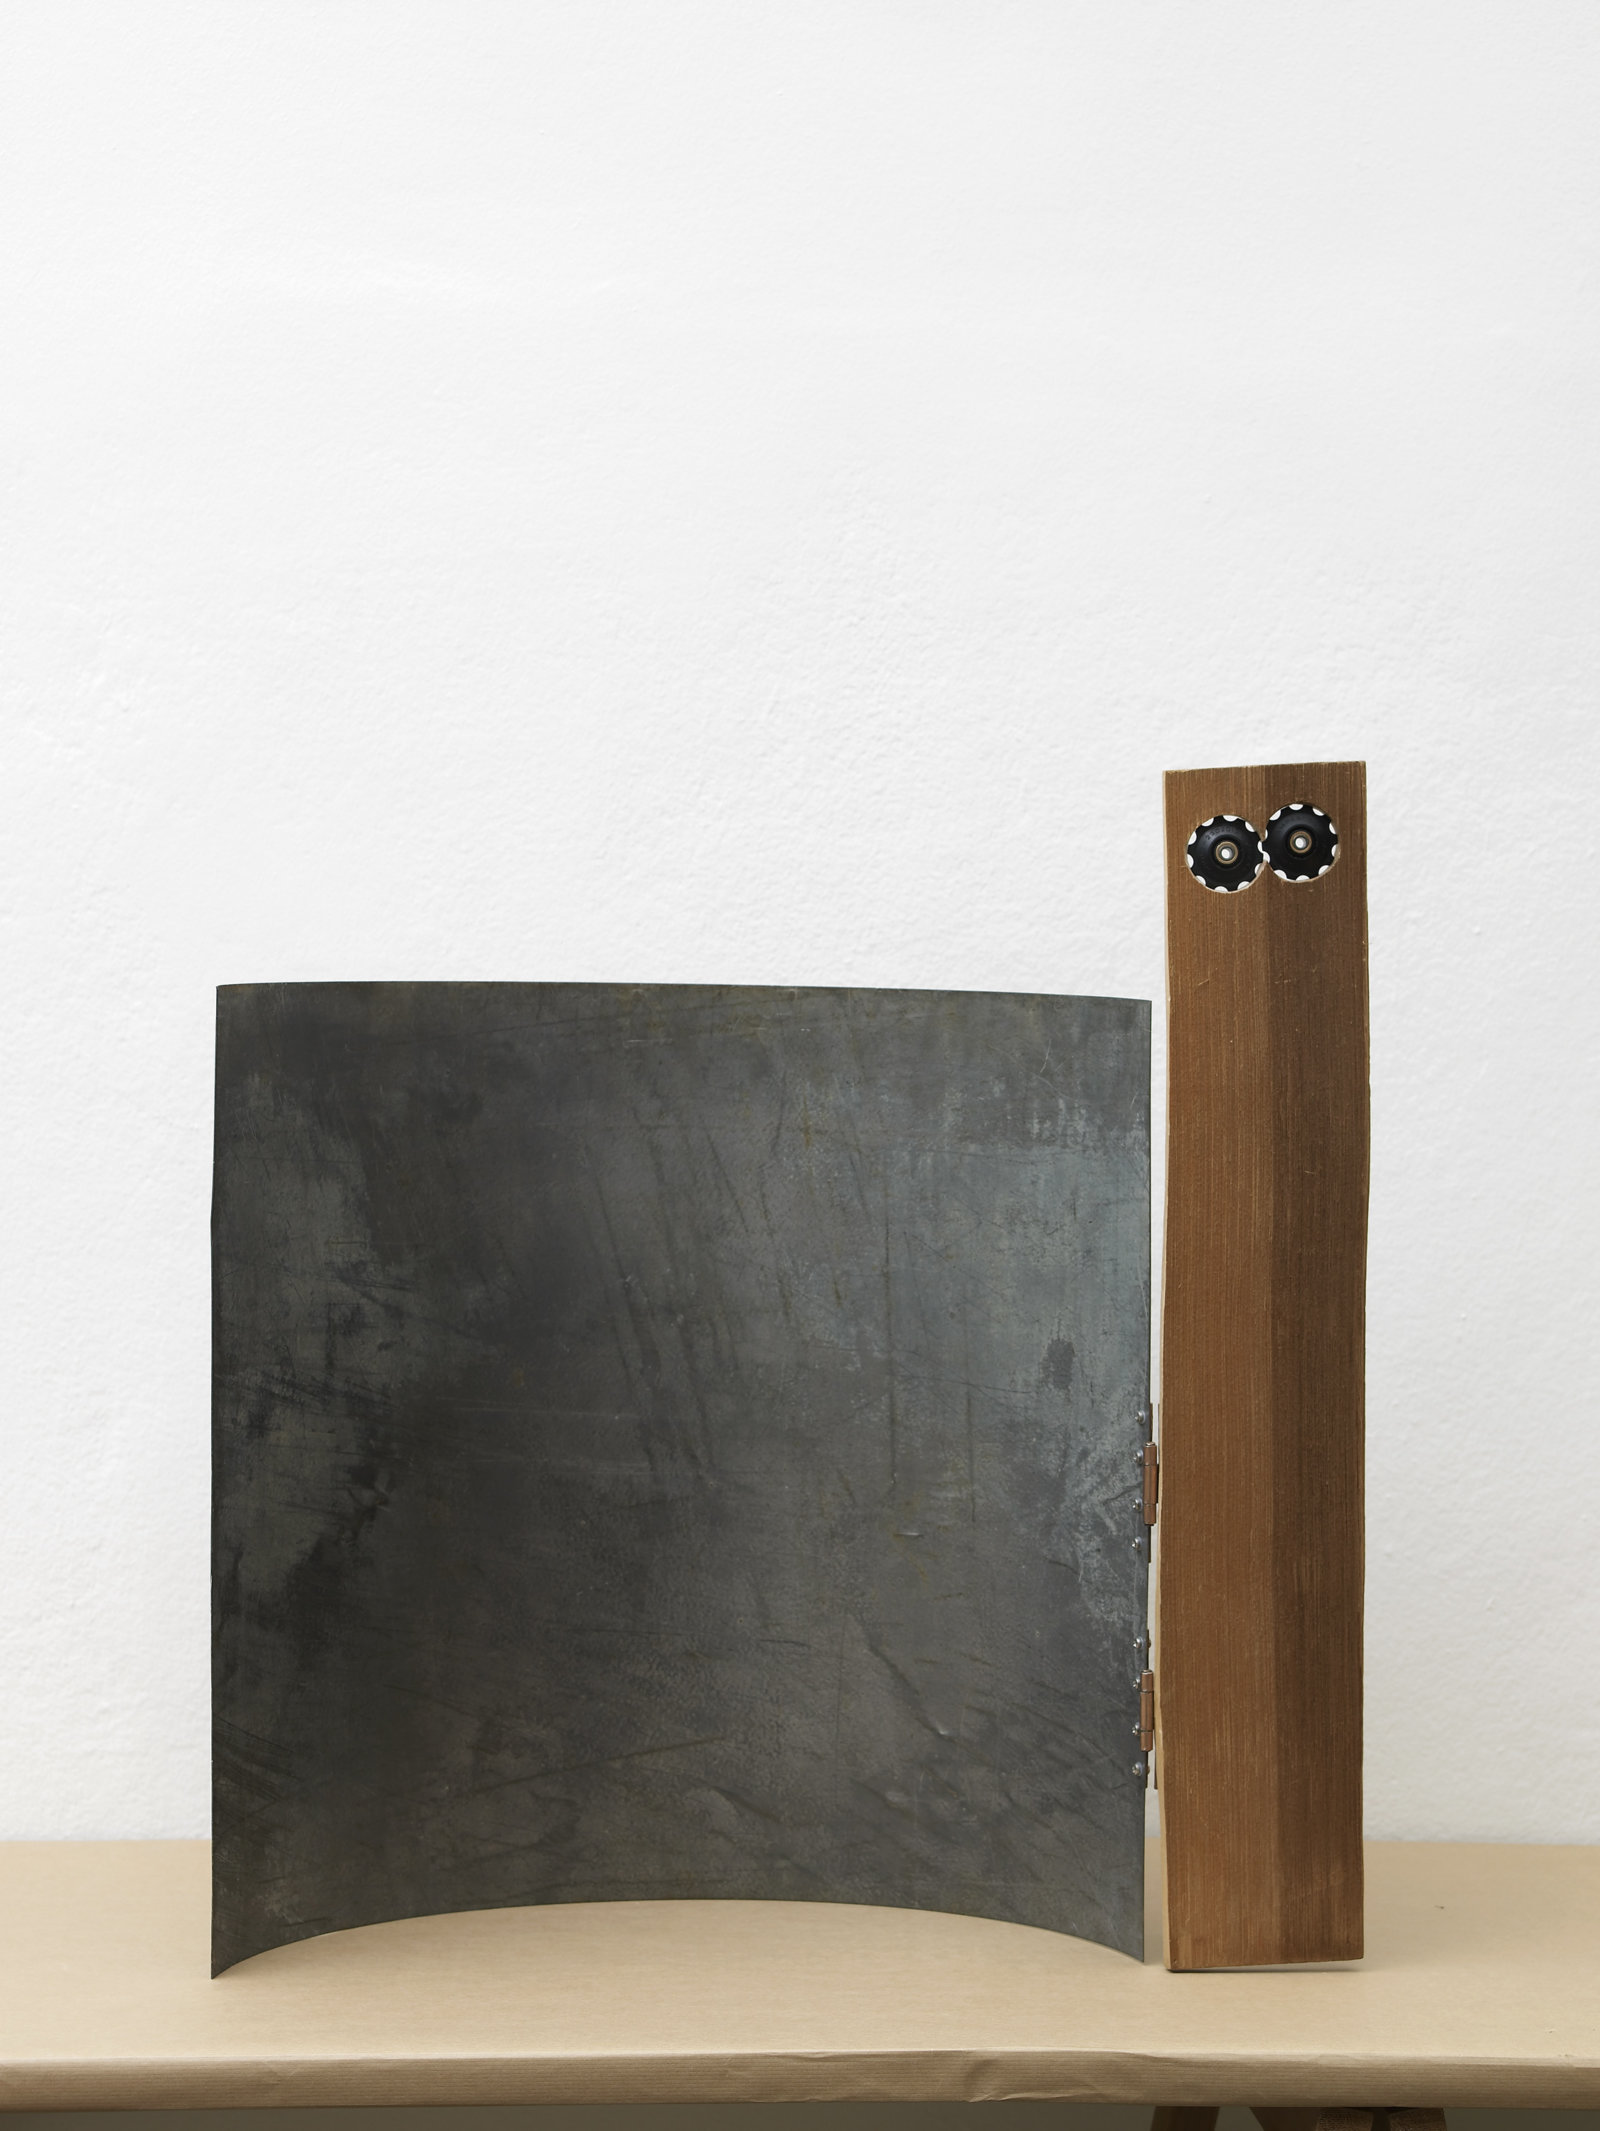 Christina Mackie, Trestle People, 2012, mixed media, dimensions variable. Installation view, Painting the Weights, Chisenhale Gallery, London, UK, 2012